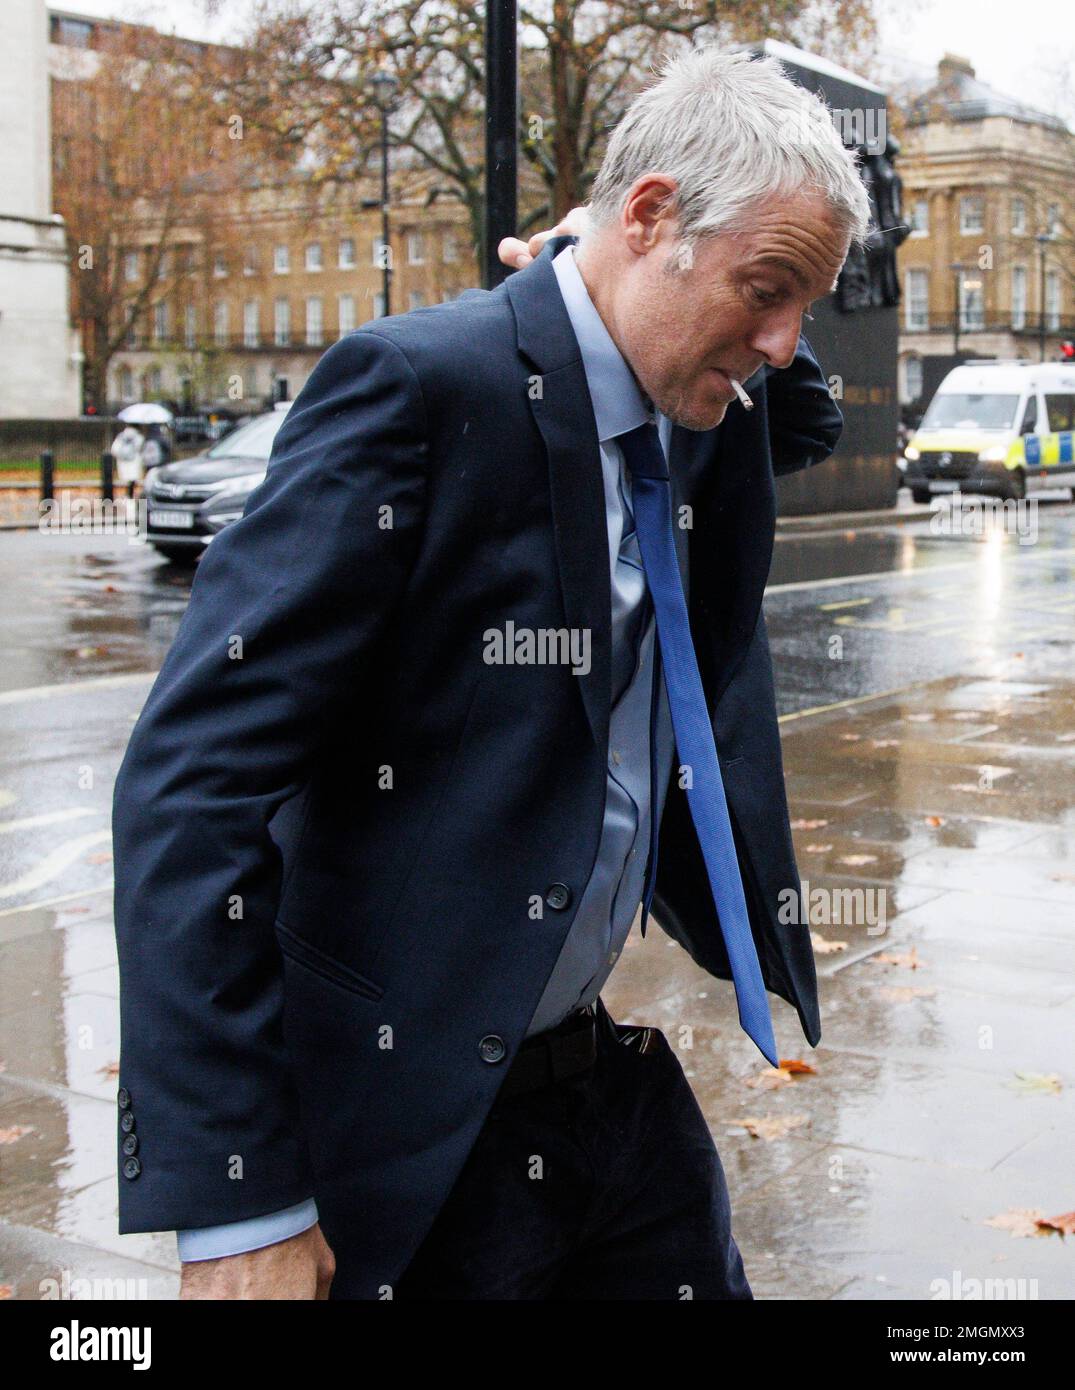 Zac Goldsmith, Minister of State for Energy, Climate and Environment, arrives at the Cabinet Office smoking a rollup cigarette Stock Photo